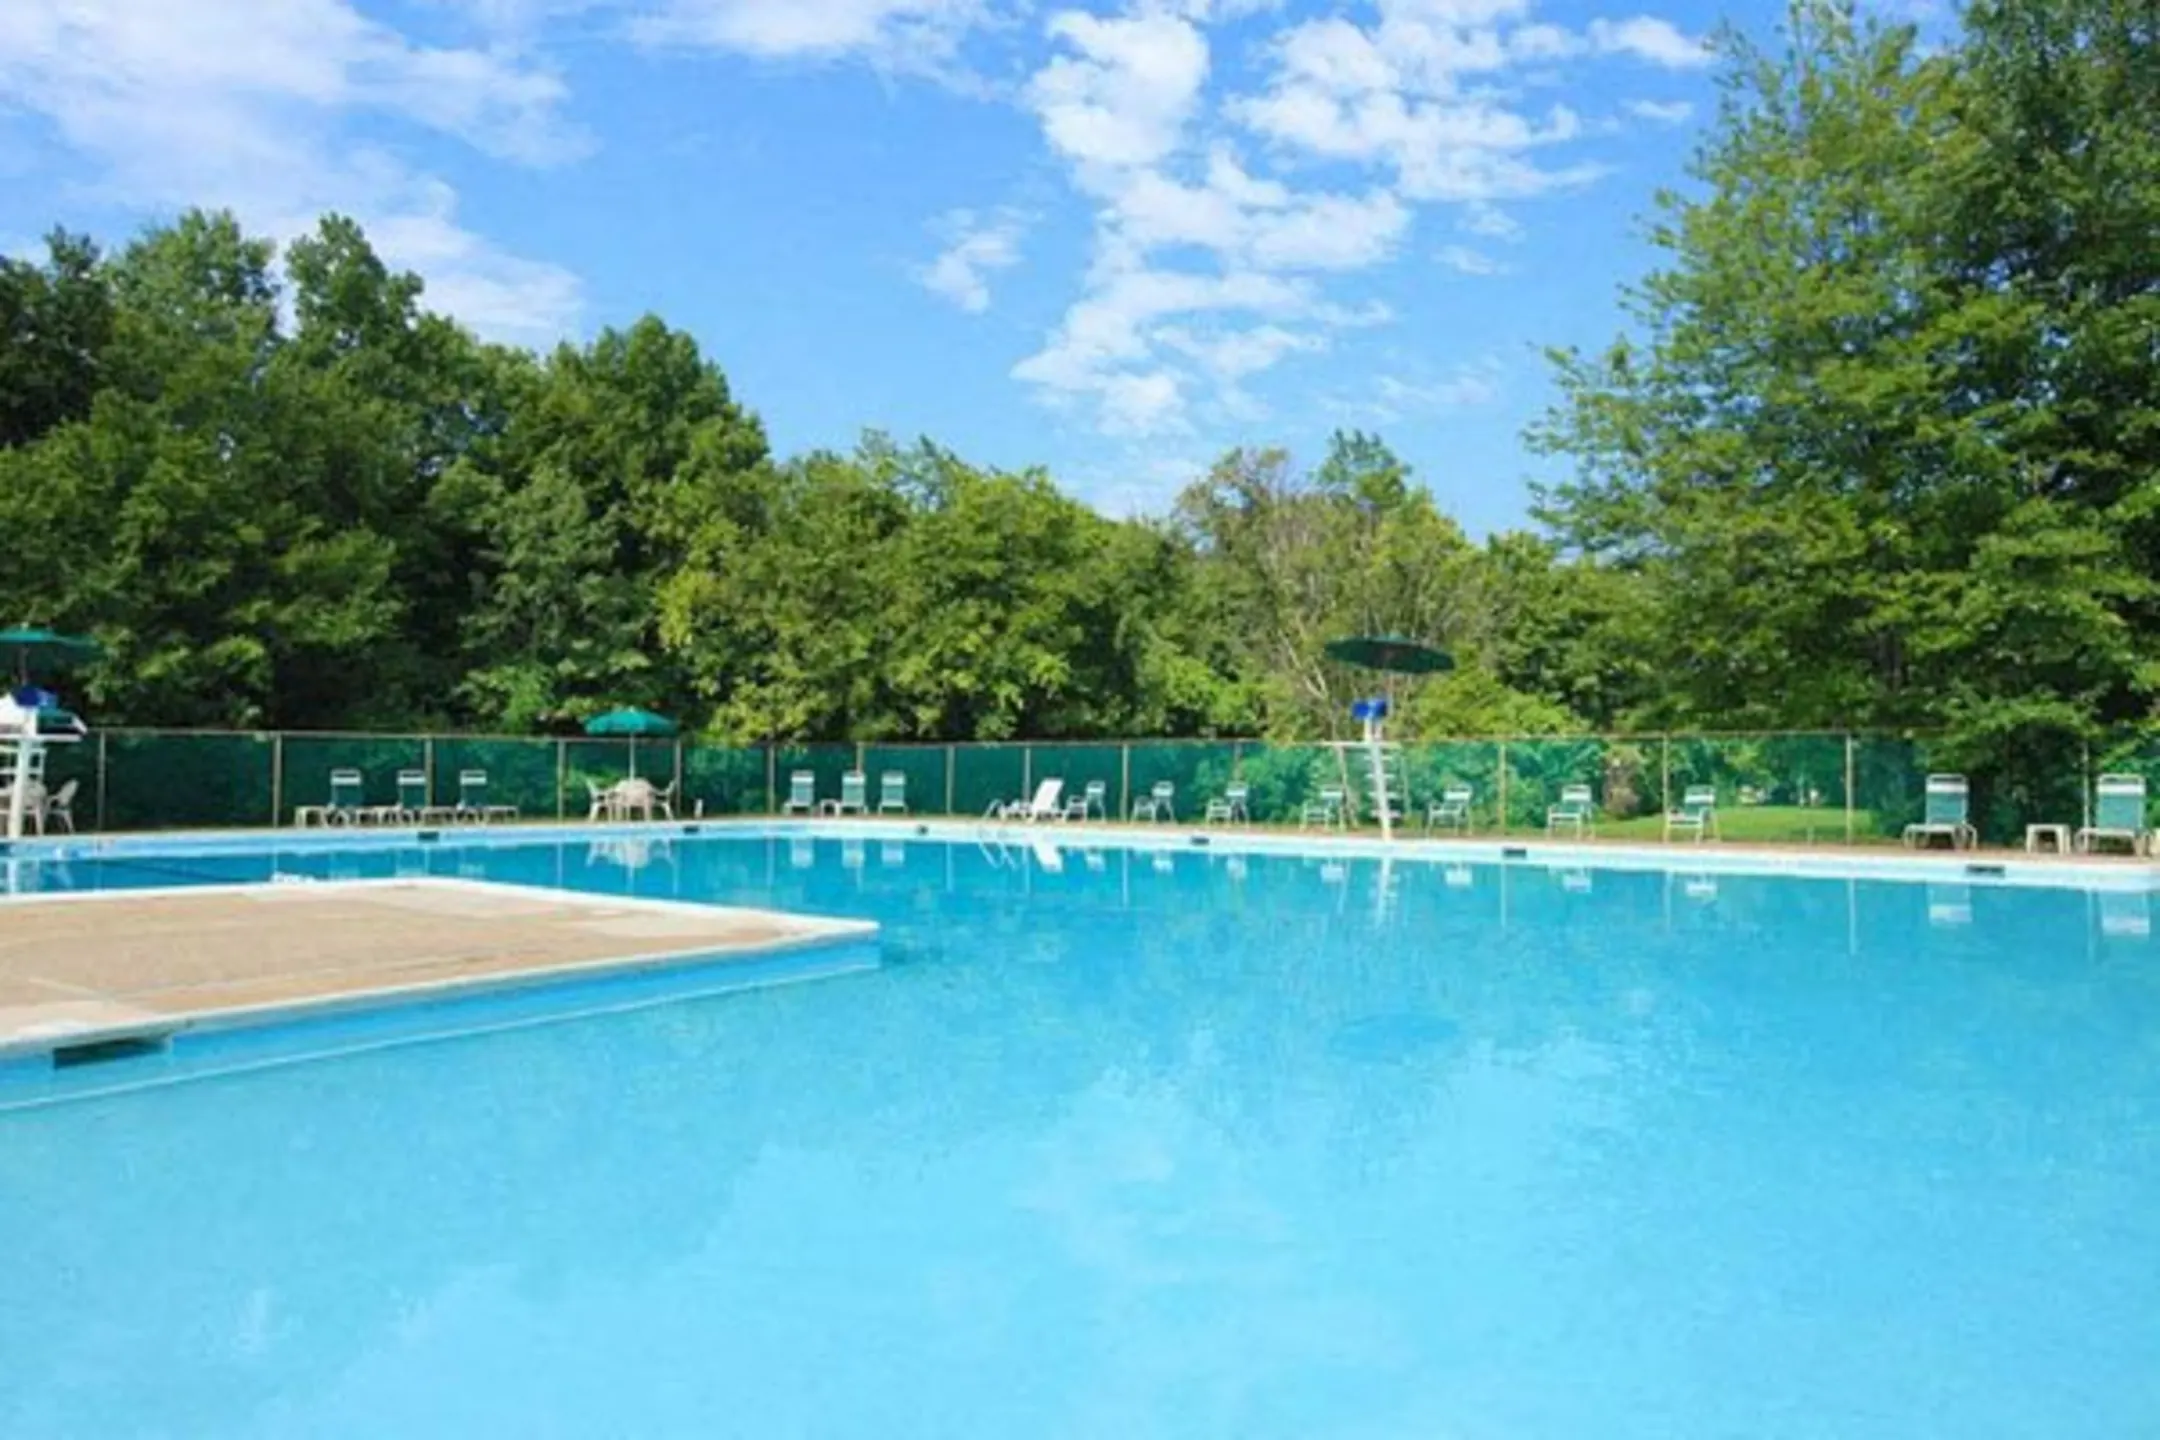 Pool - Cedar Gardens & Towers Apartments & Townhomes - Windsor Mill, MD